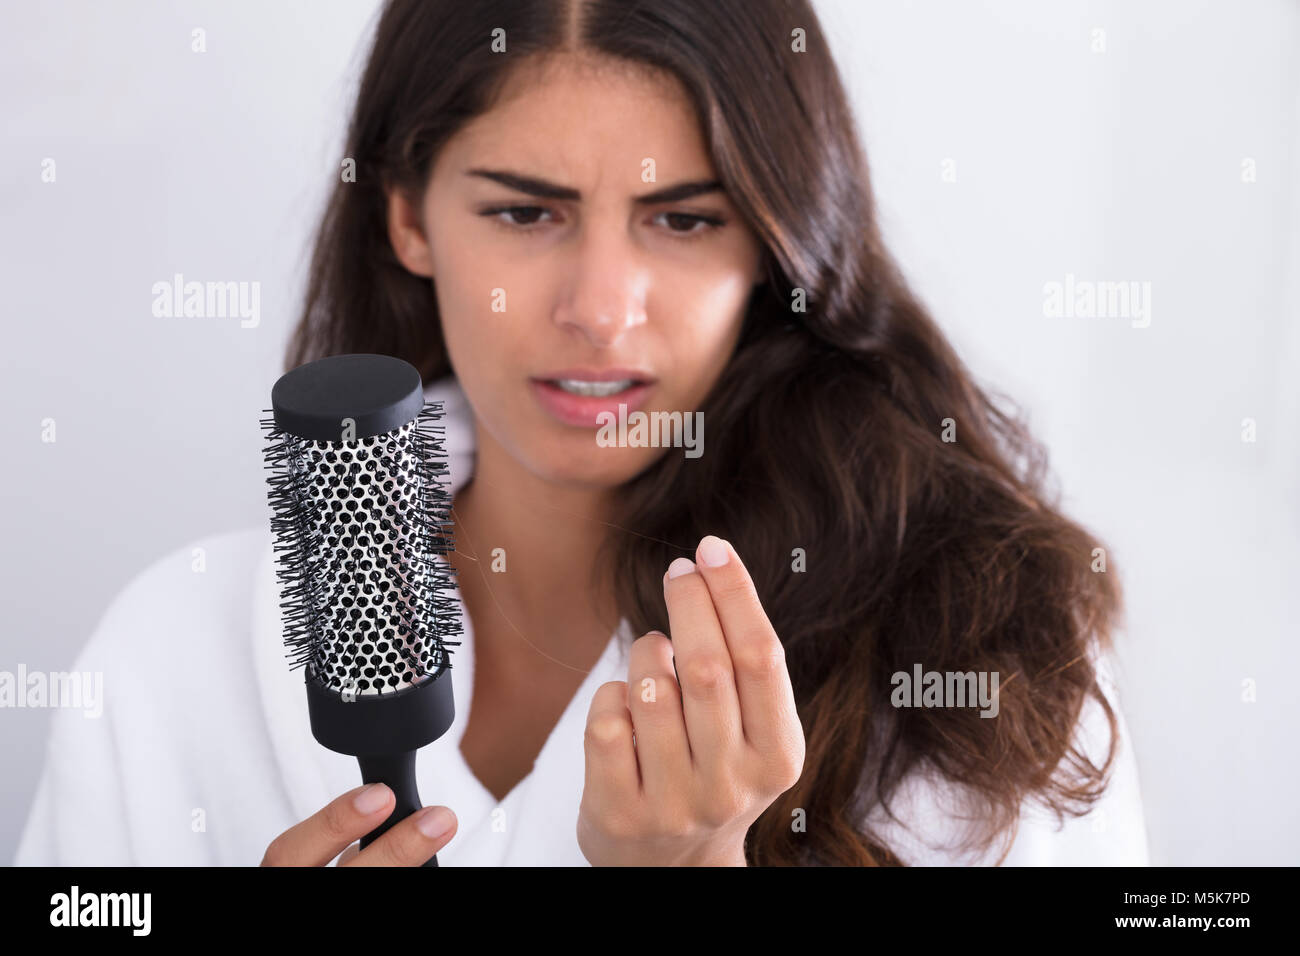 Young Woman In Bathrobe Holding Comb Looking At Hair Loss At Home Stock Photo